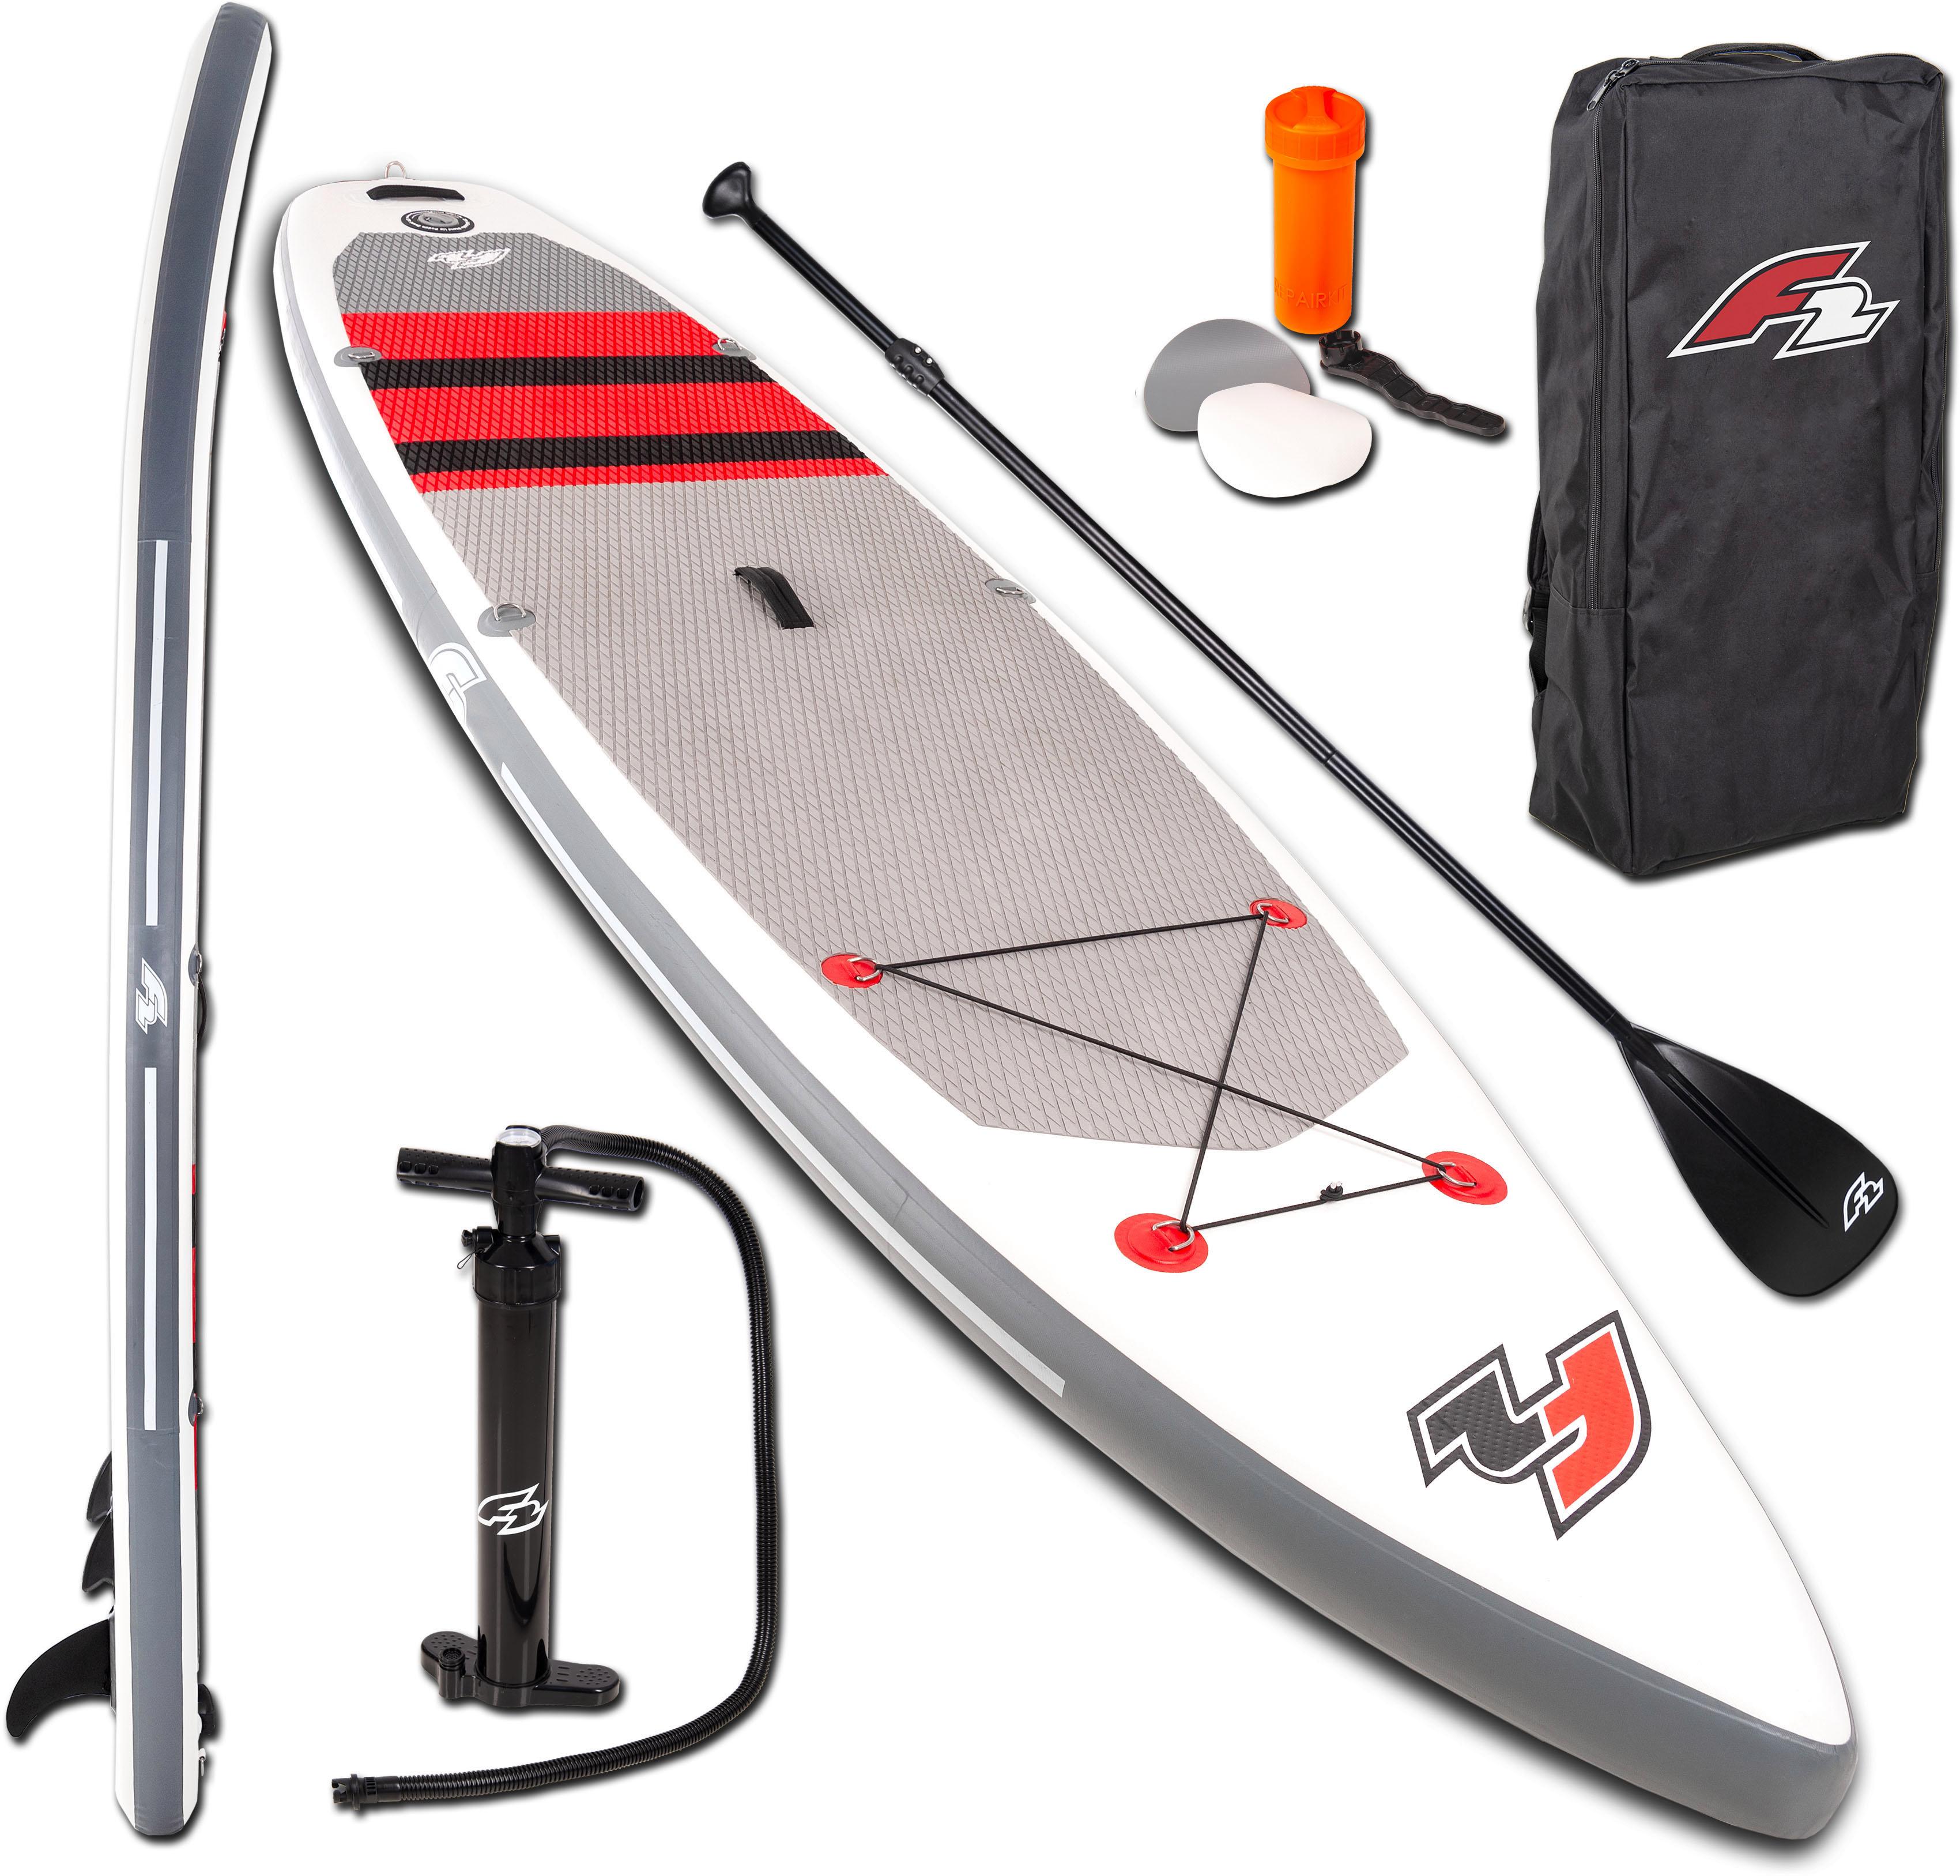 F2 Inflatable Paddling OTTO (Set, tlg.), Up »Union 11,5«, SUP-Board 5 Stand kaufen bei